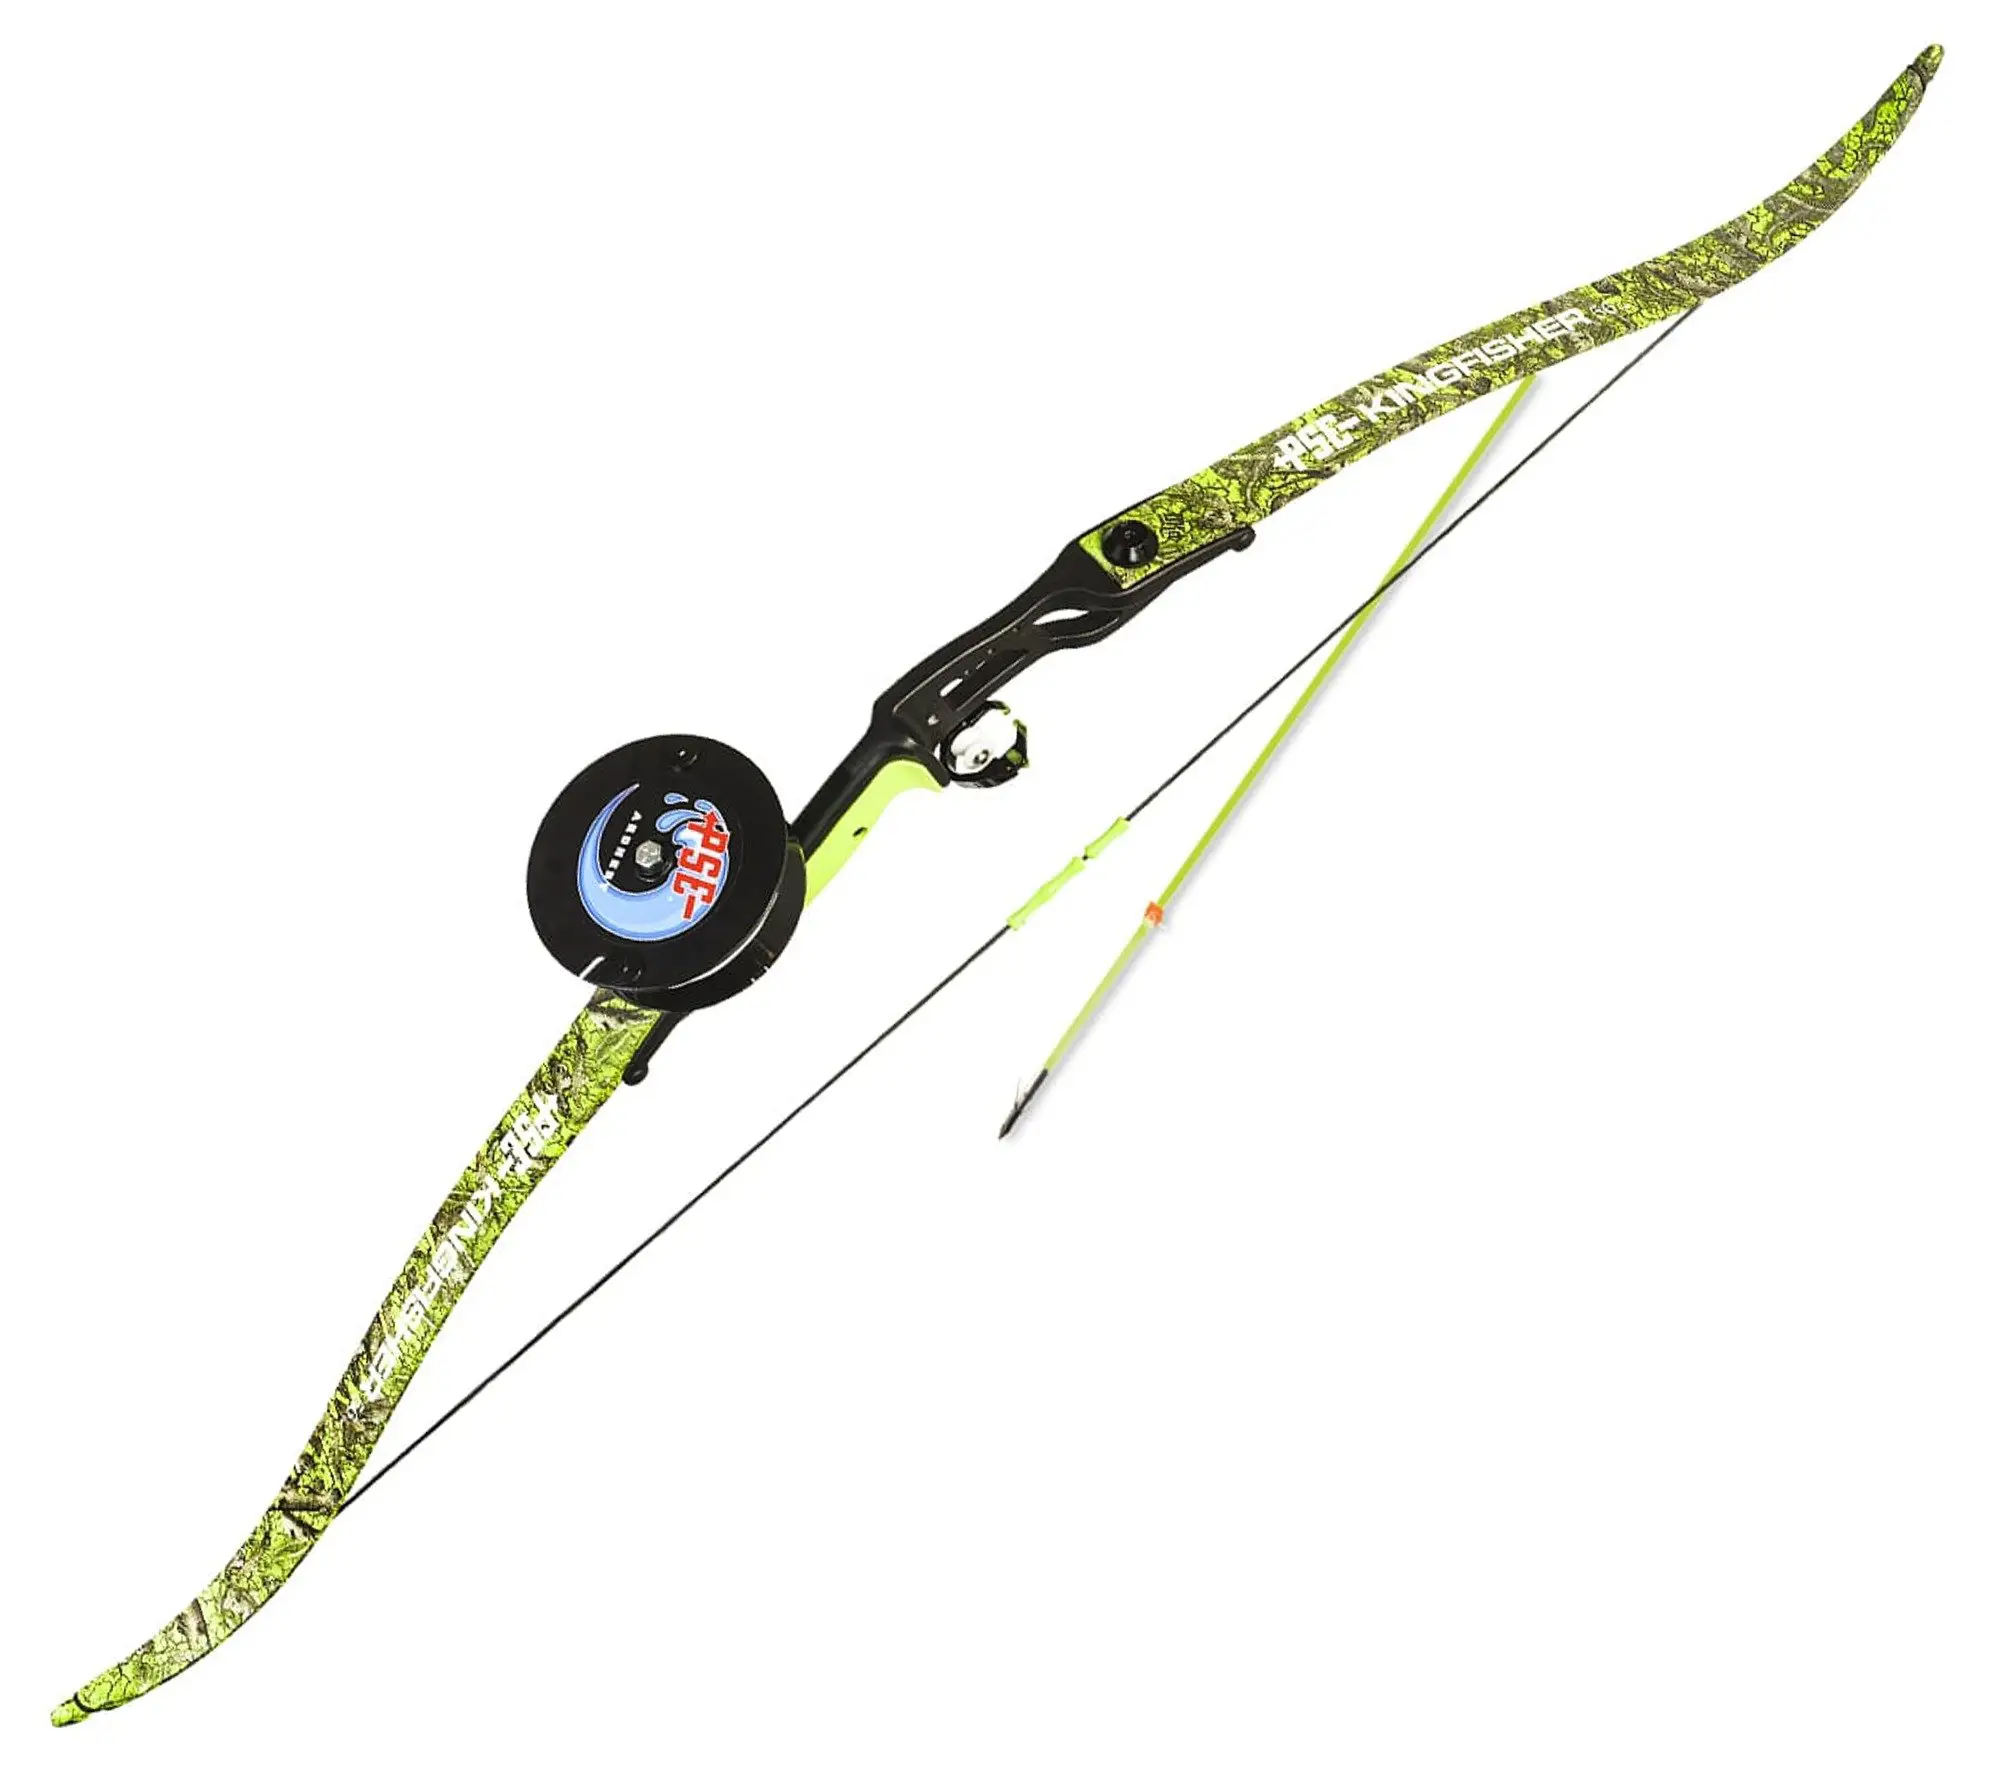 PSE Archery KingFisher Bowfishing Recurve Bow Package - 56-45